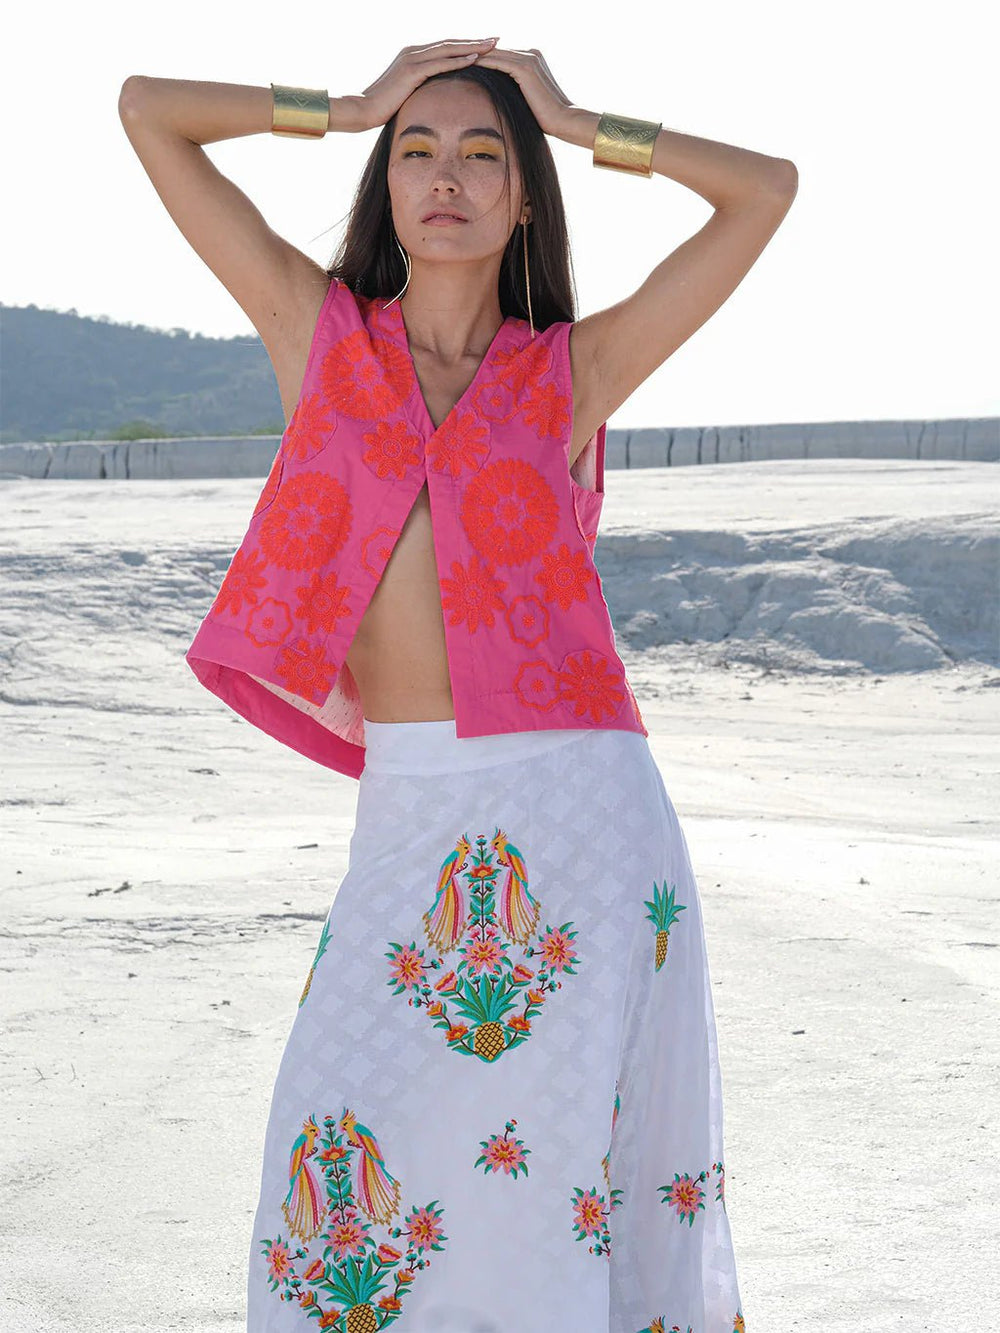 Nimo with Love Skirts Lantana Skirt in White / Parrot Embroidery